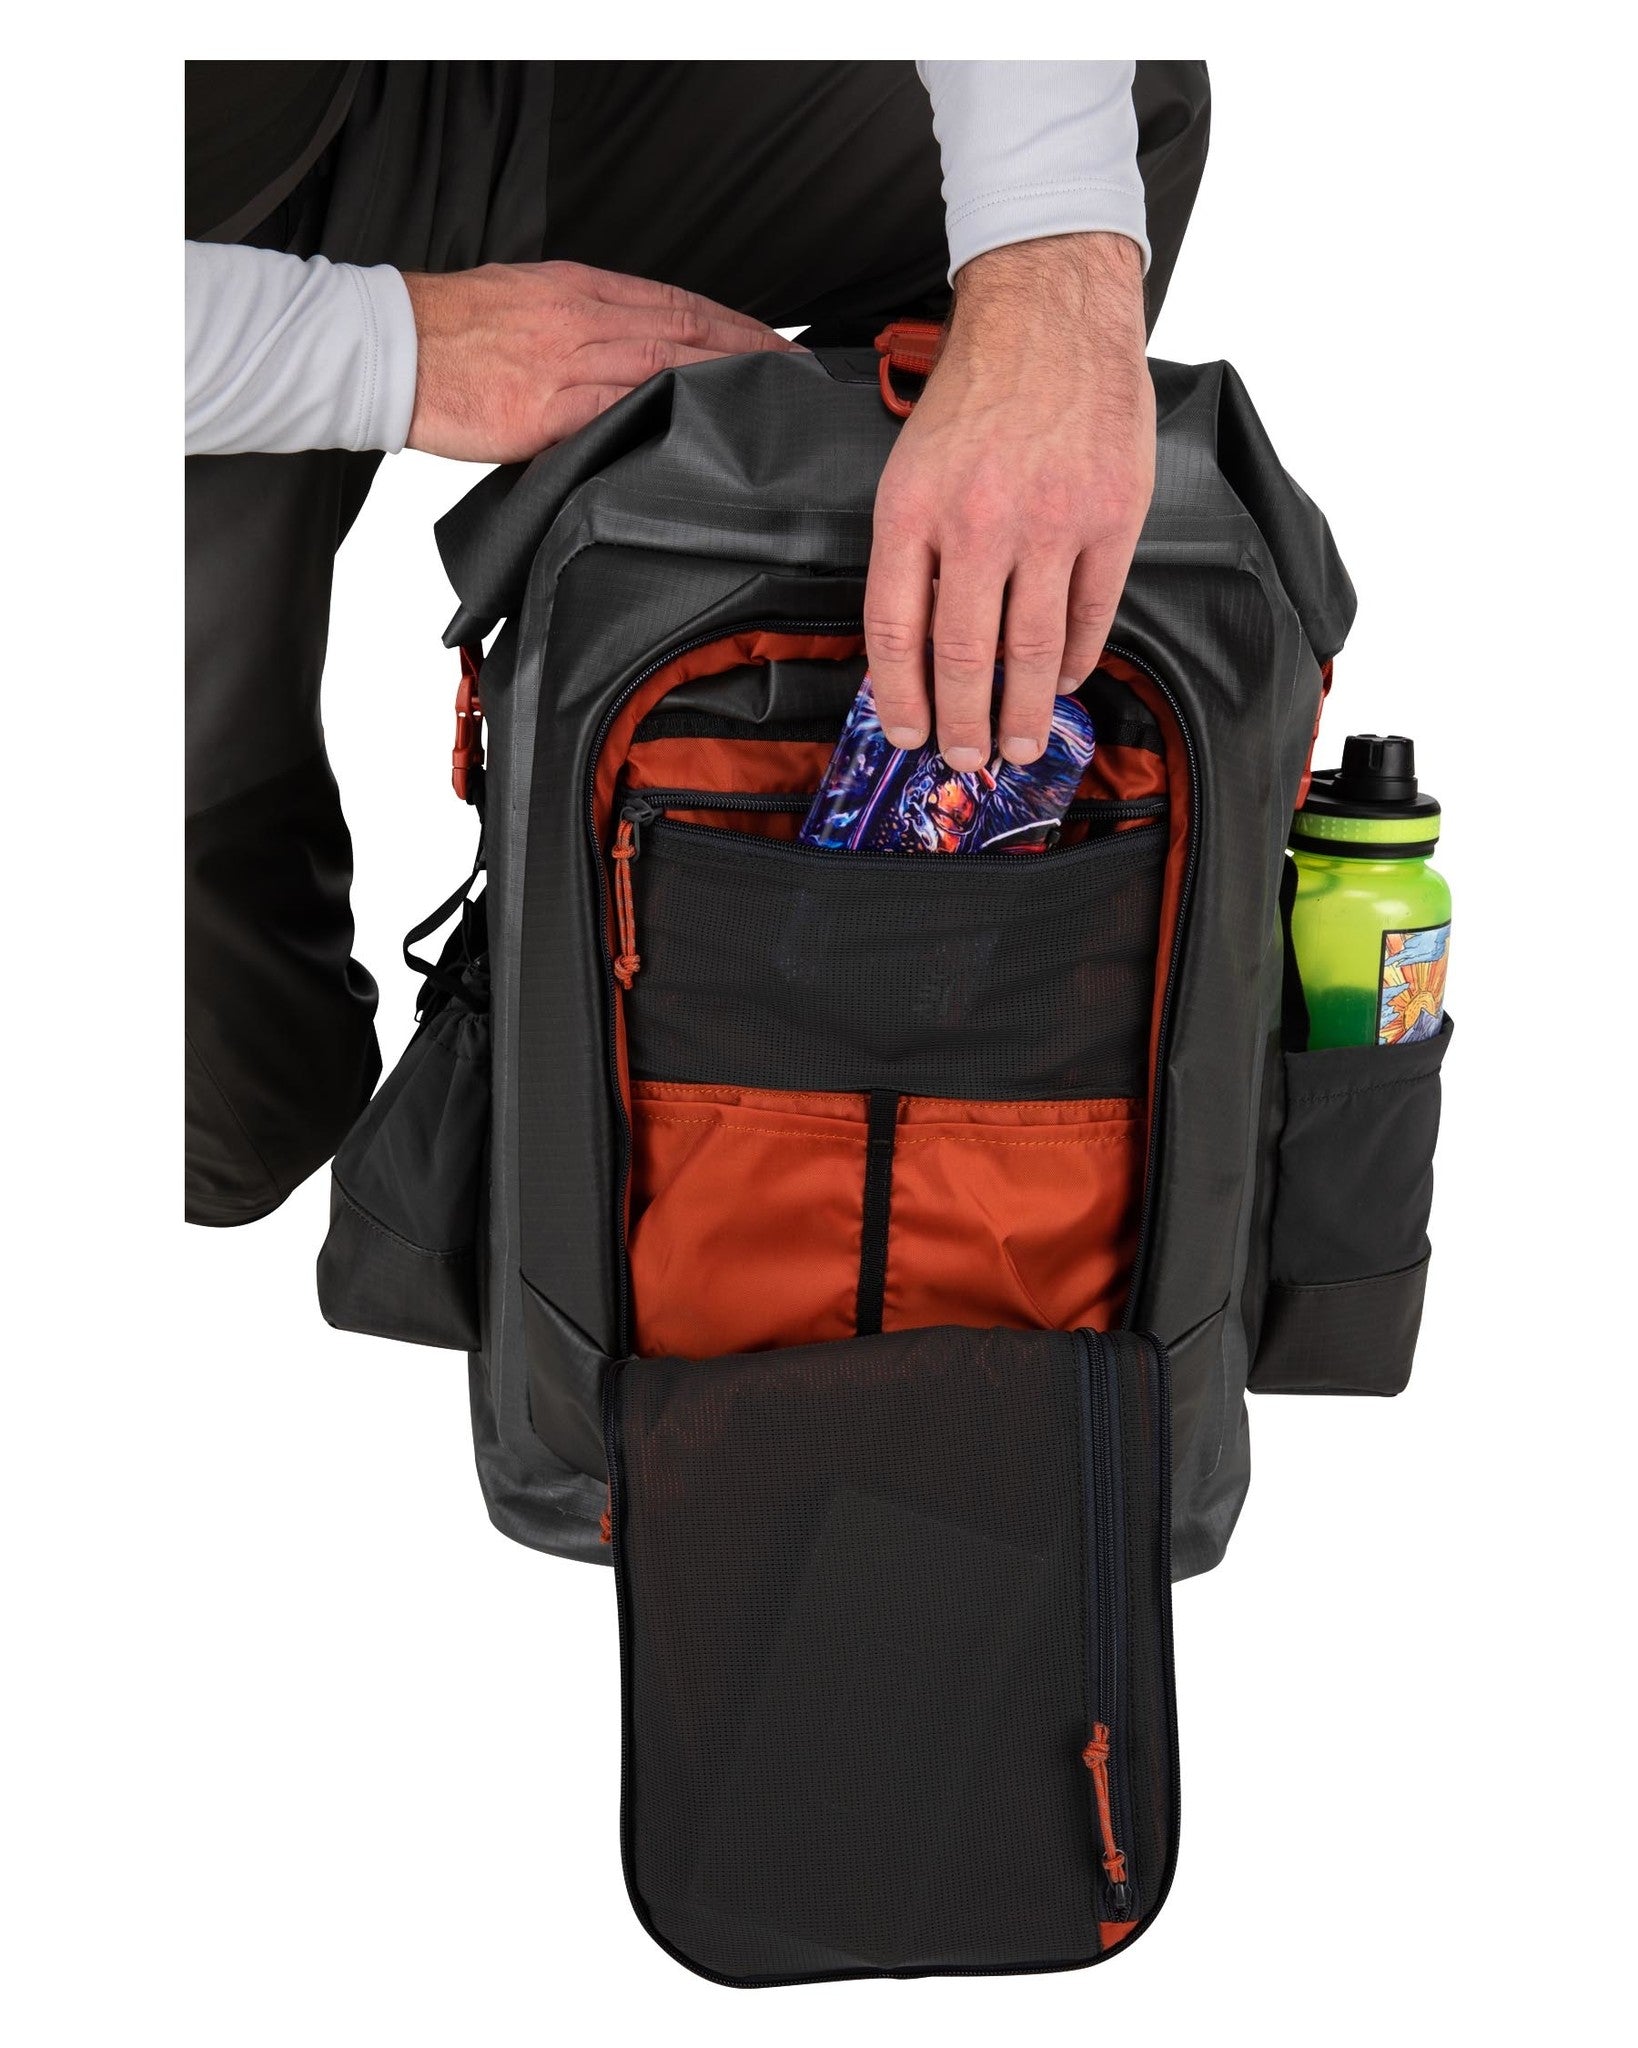 G3 Guide Backpack - New For 2022!